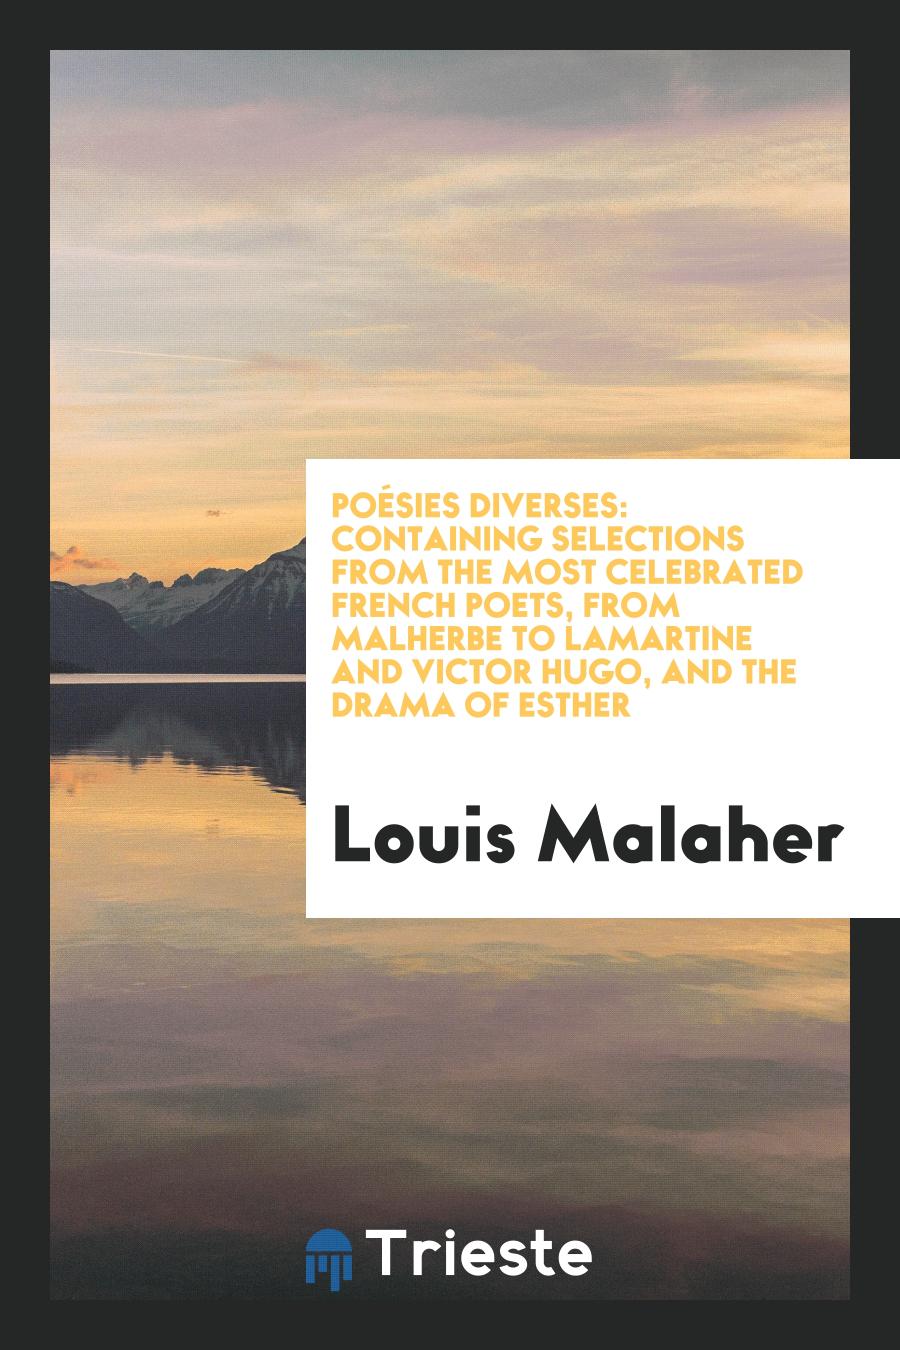 Poésies Diverses: Containing Selections from the Most Celebrated French Poets, from Malherbe to Lamartine and Victor Hugo, and the Drama of Esther